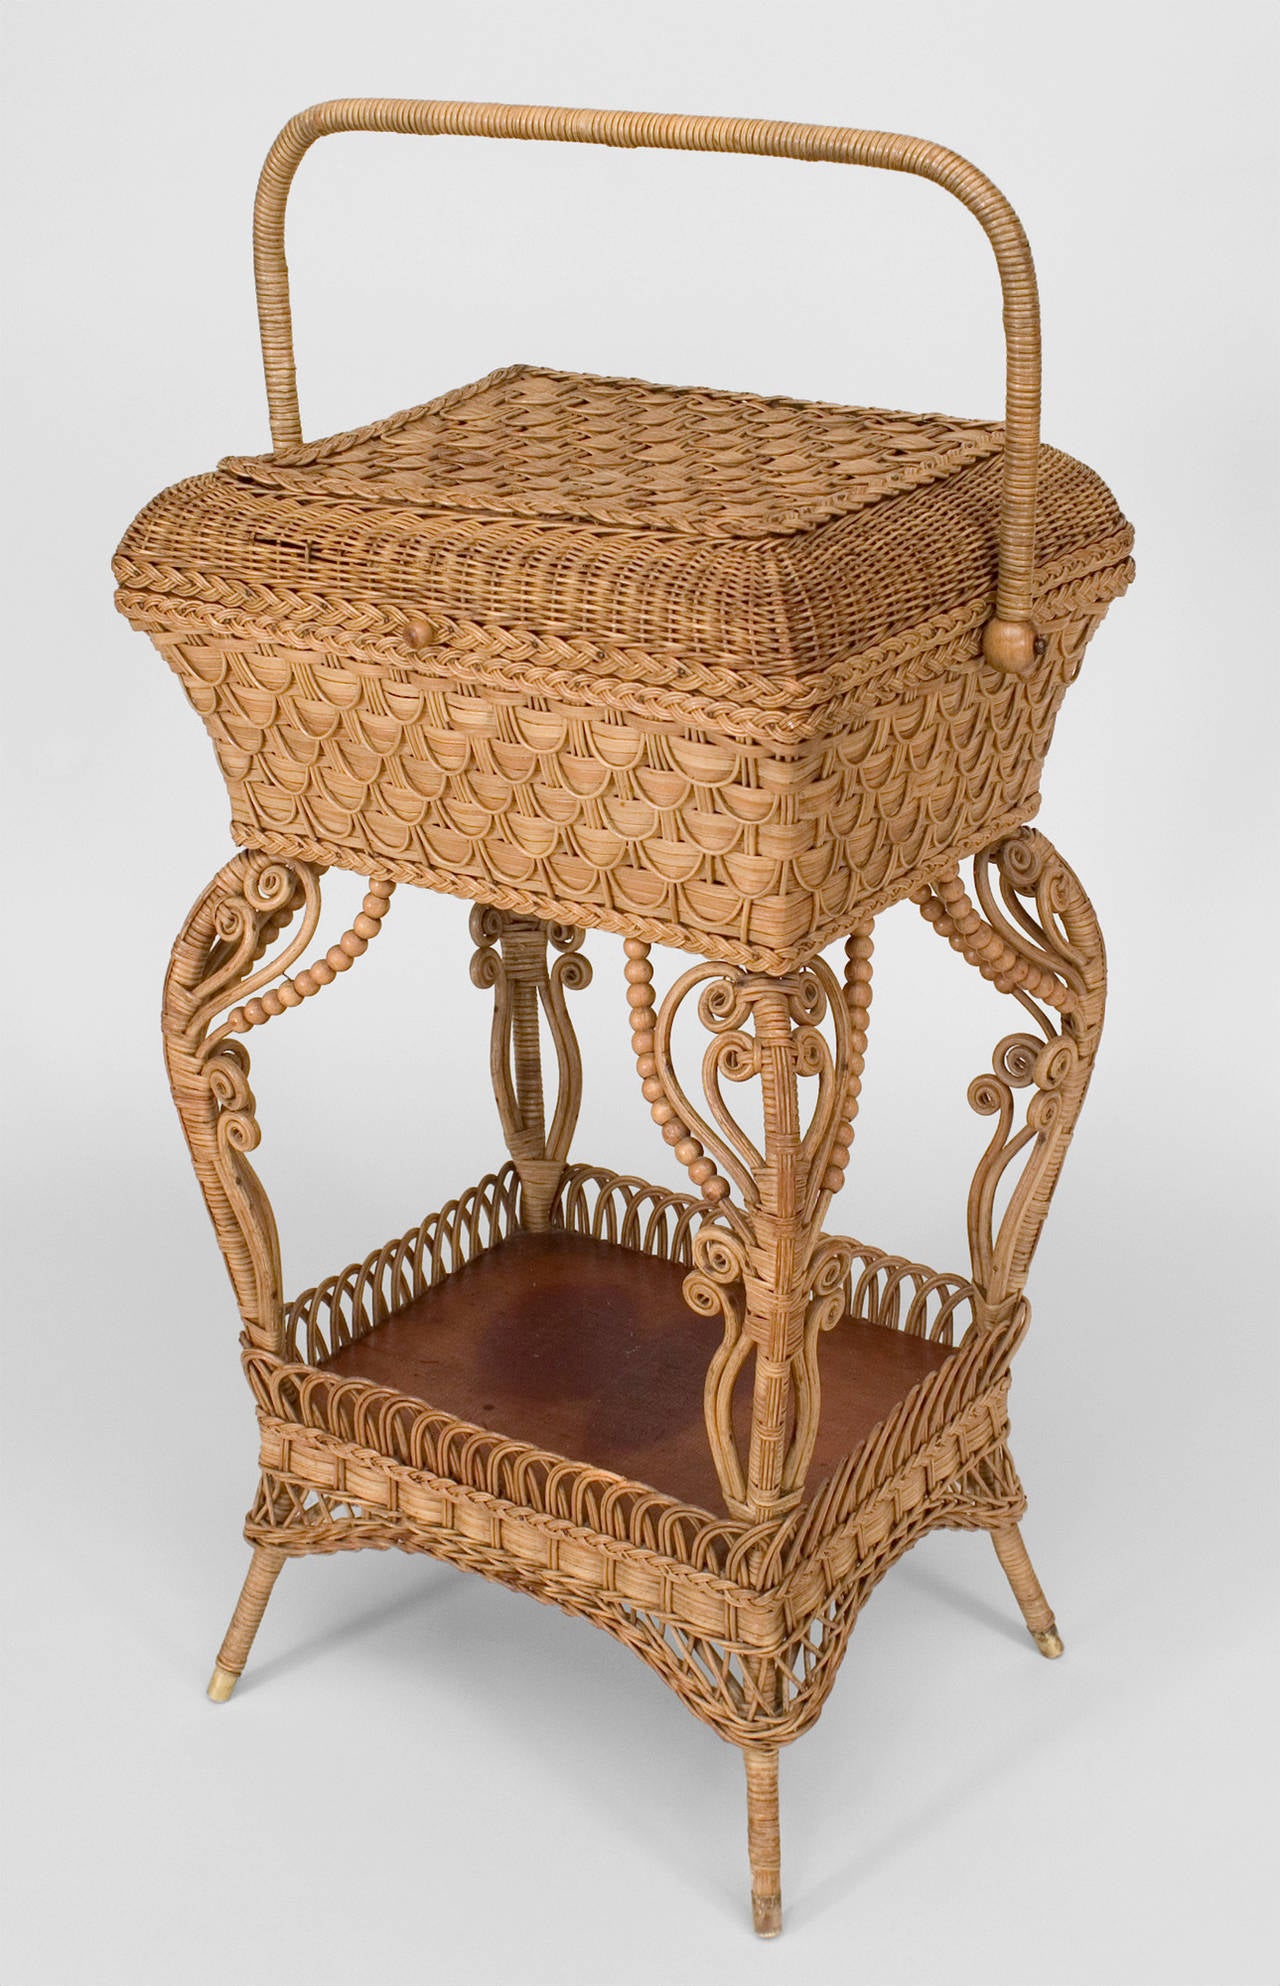 American Victorian natural wicker sewing table with woven flip top box with handle above a bottom shelf with gallery and scroll decorative trim (HEYWOOD WAKEFIELD label)
